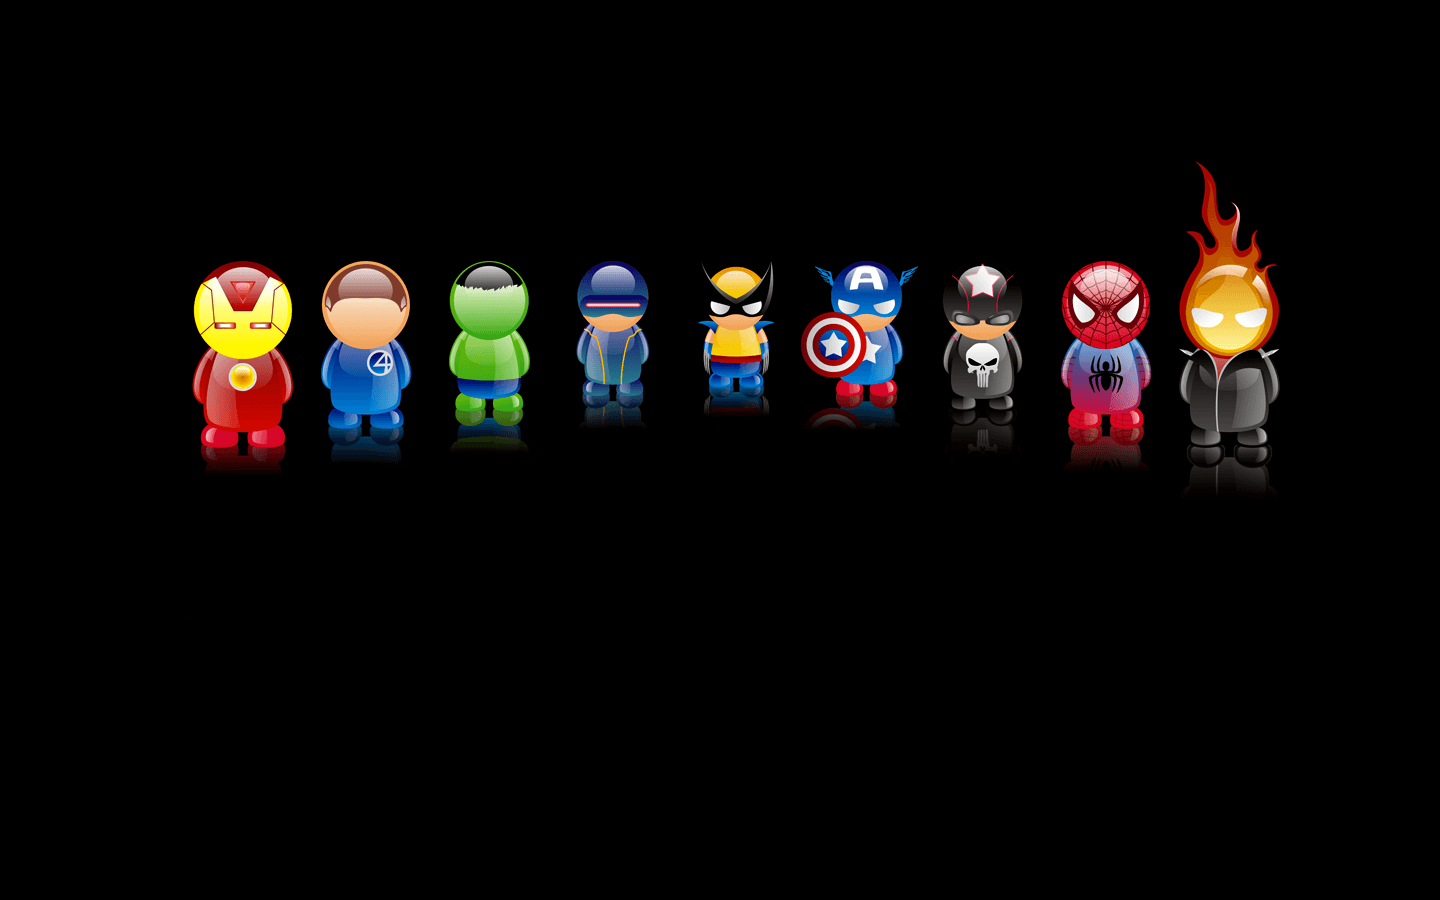 Here is another cute one | Avengers wallpaper, Cool wallpapers backgrounds,  Cool wallpaper